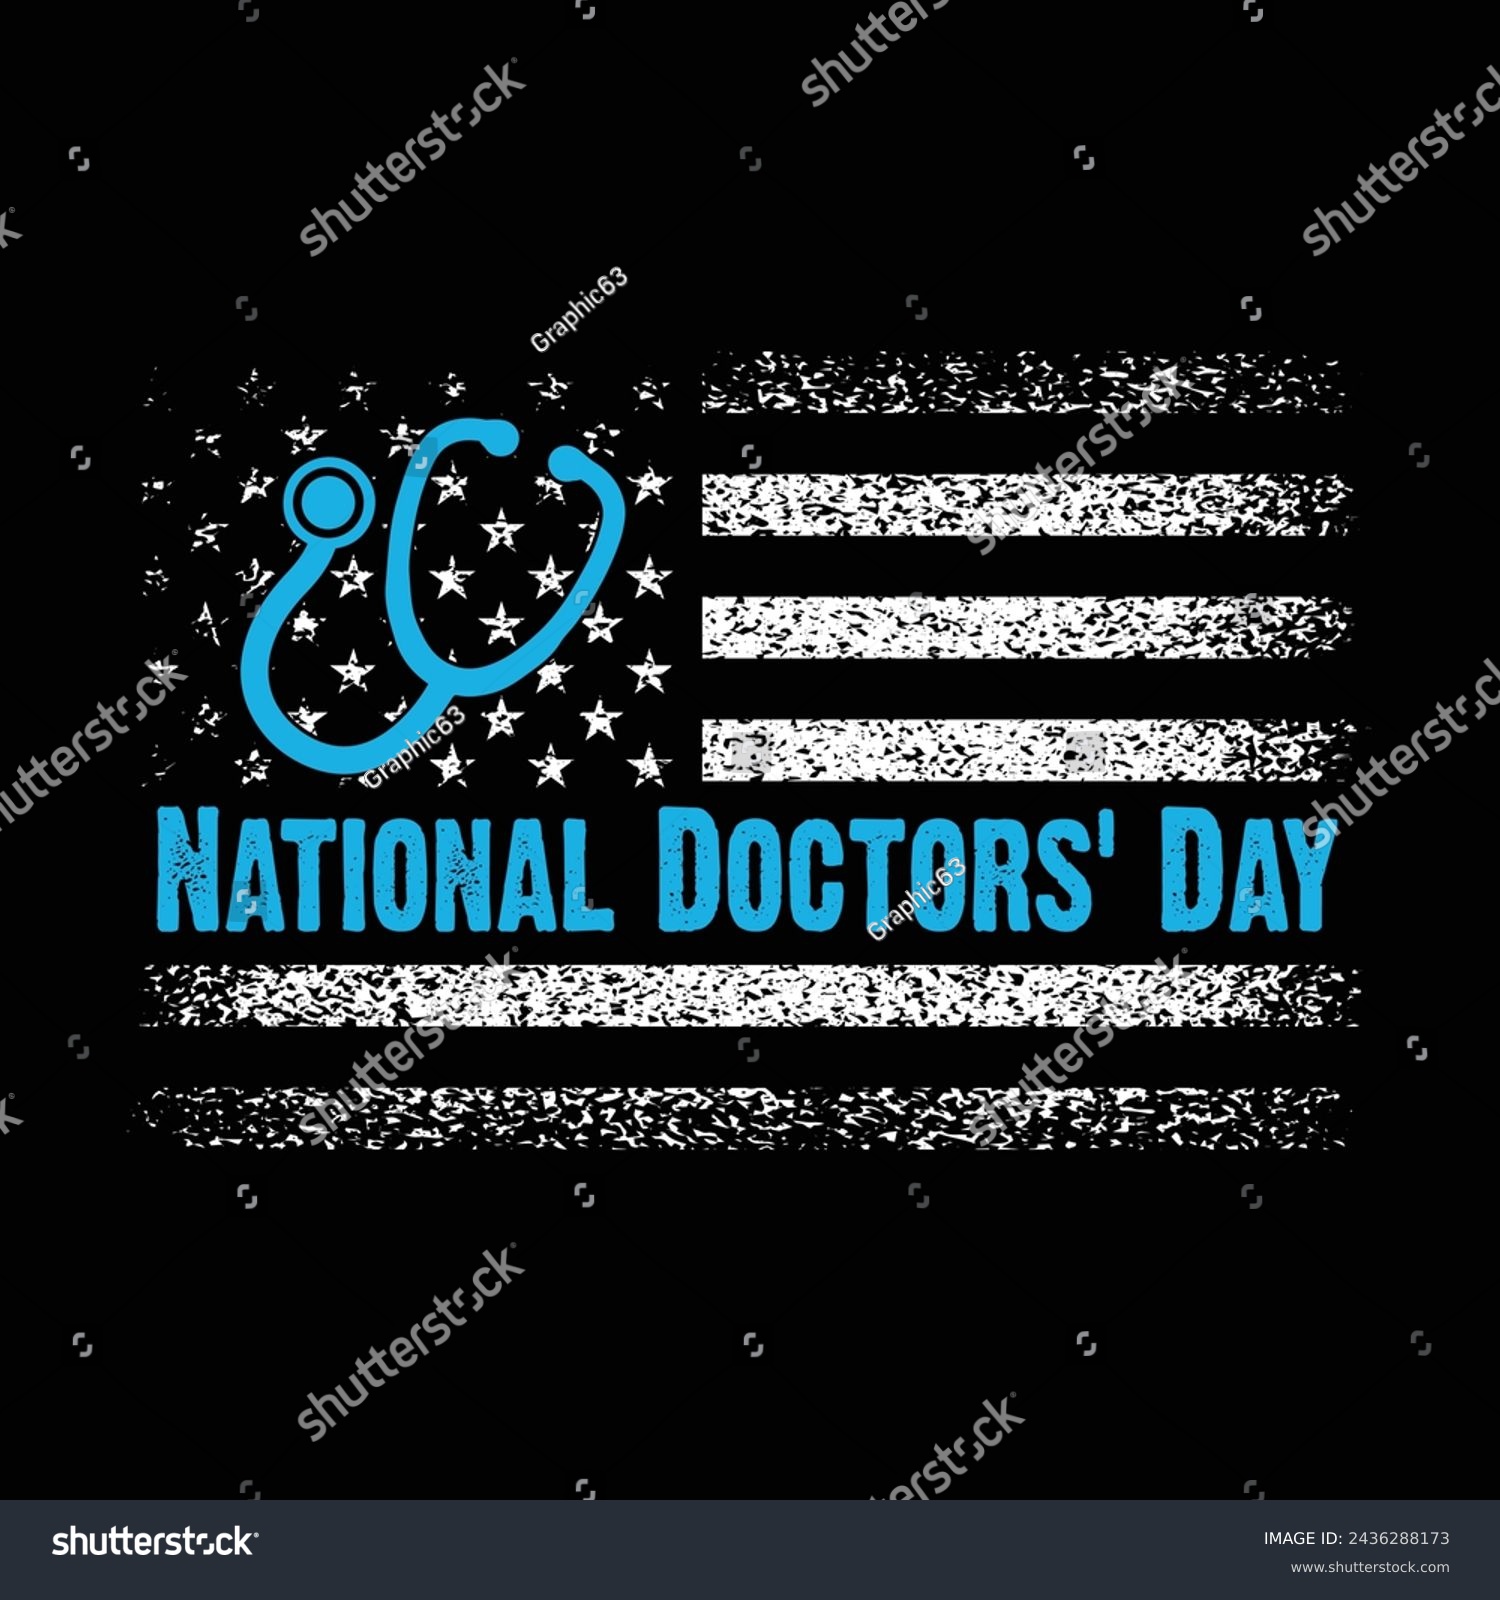 SVG of American Distressed Flag.National Doctors Day Motivational Typography Quotes Design Vector t shirt,poster,banner,backround. svg